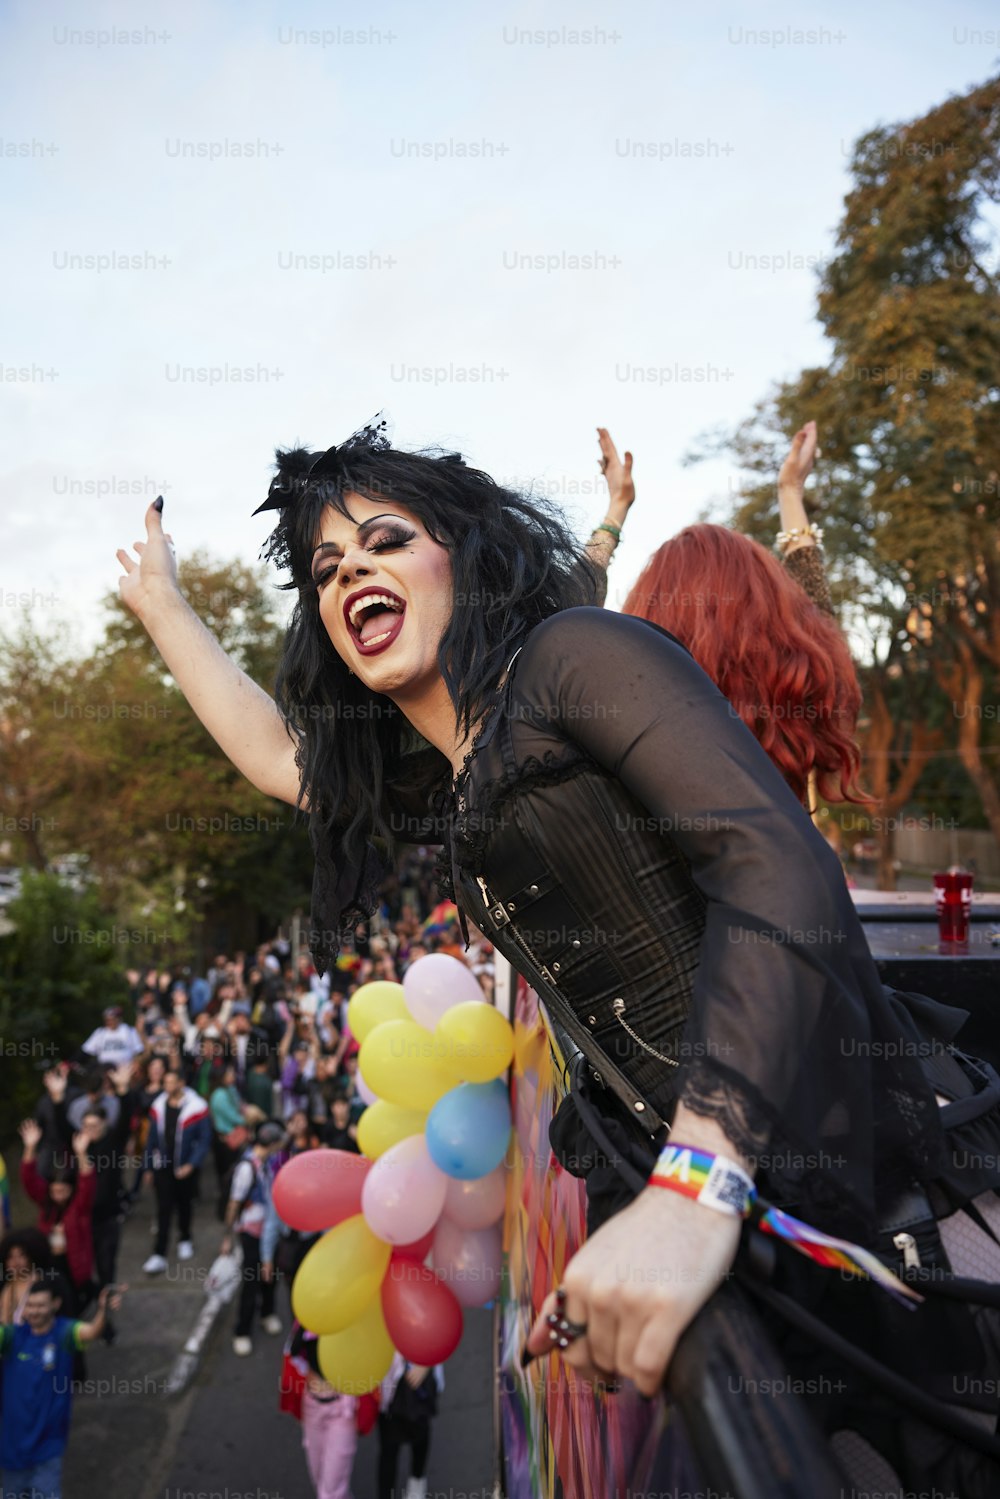 a woman with black hair and makeup holding a bunch of balloons